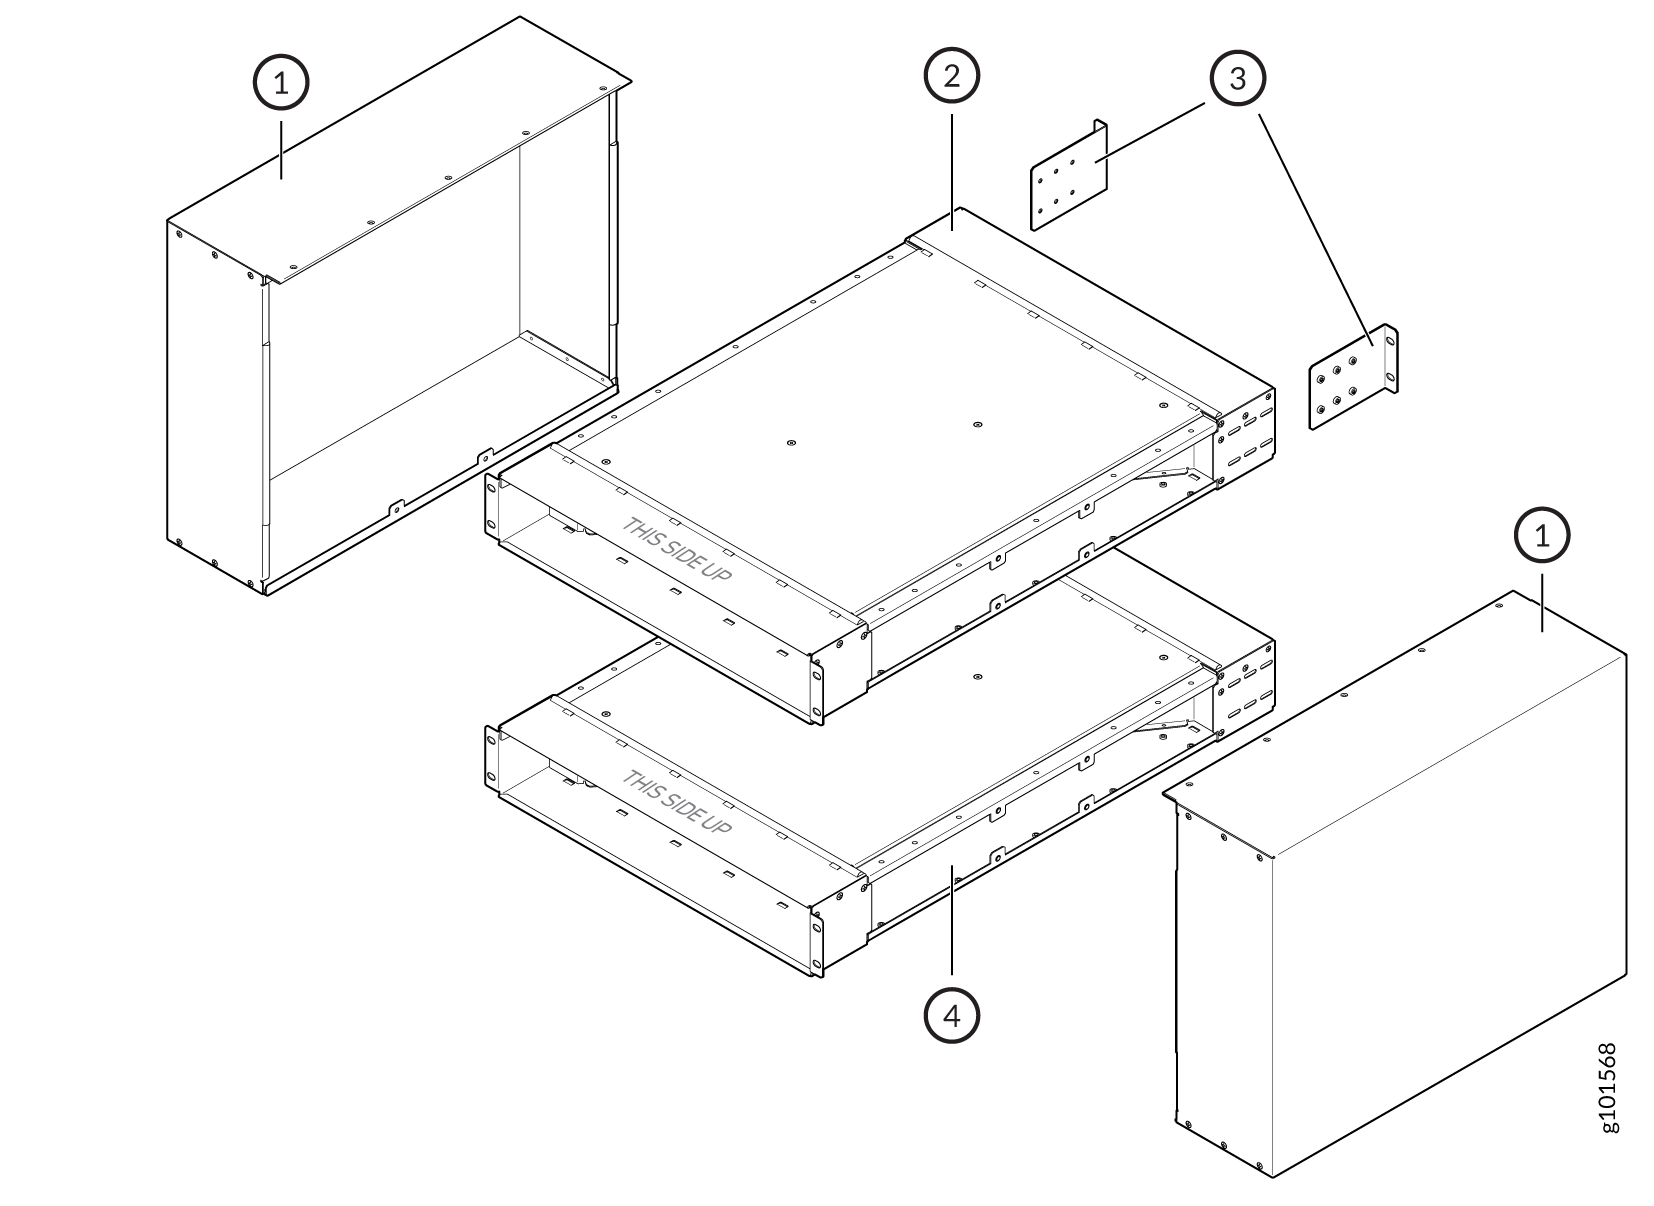 Components of the Air Deflector Kit